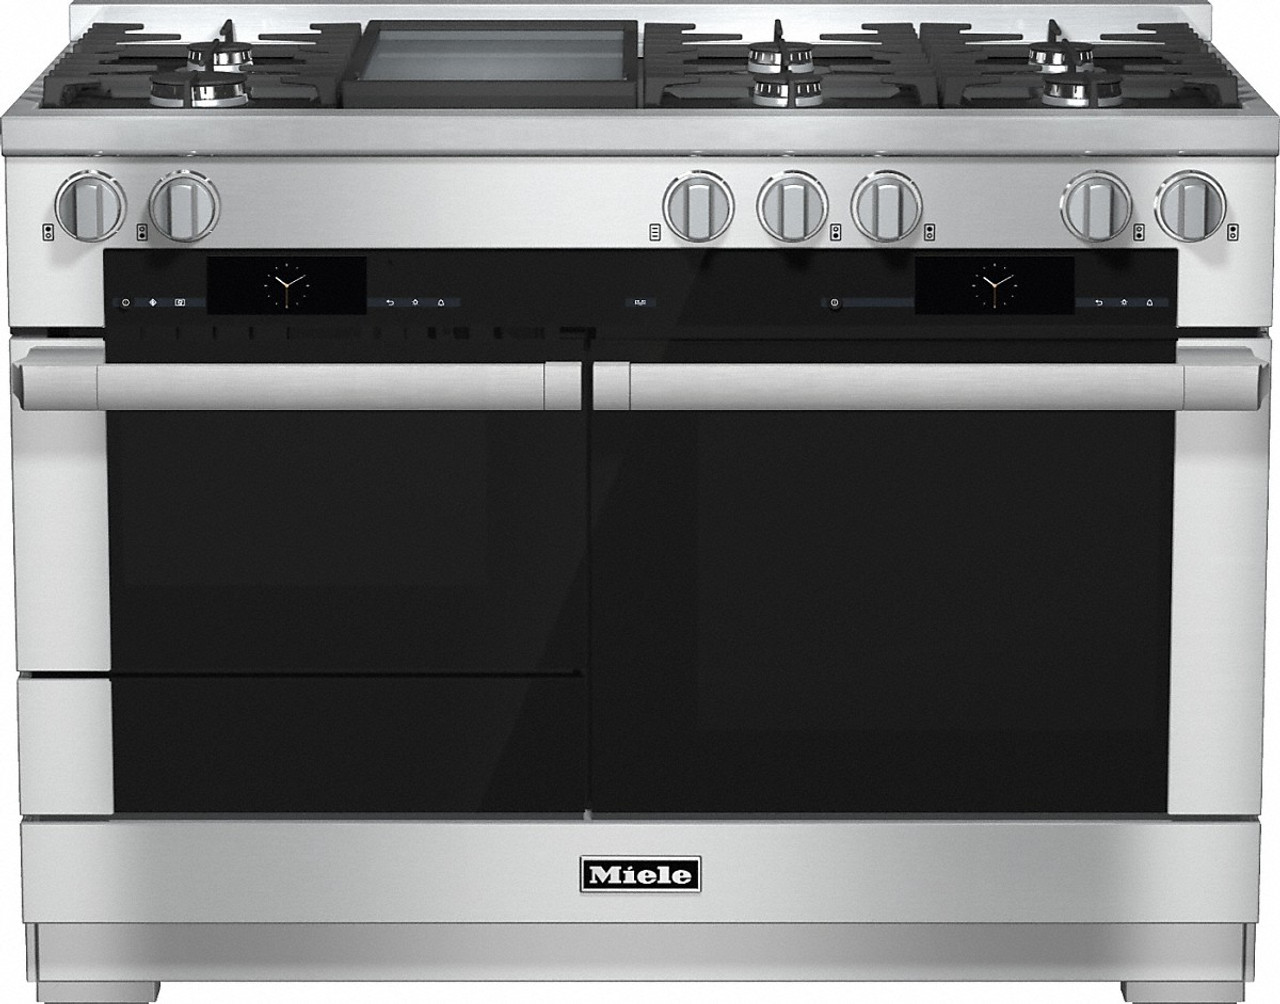 HR1956G - 120cm NatGas Freestanding Cooker, Electric Oven with Microwave, Pyrolytic Cleaning- Clean Steel